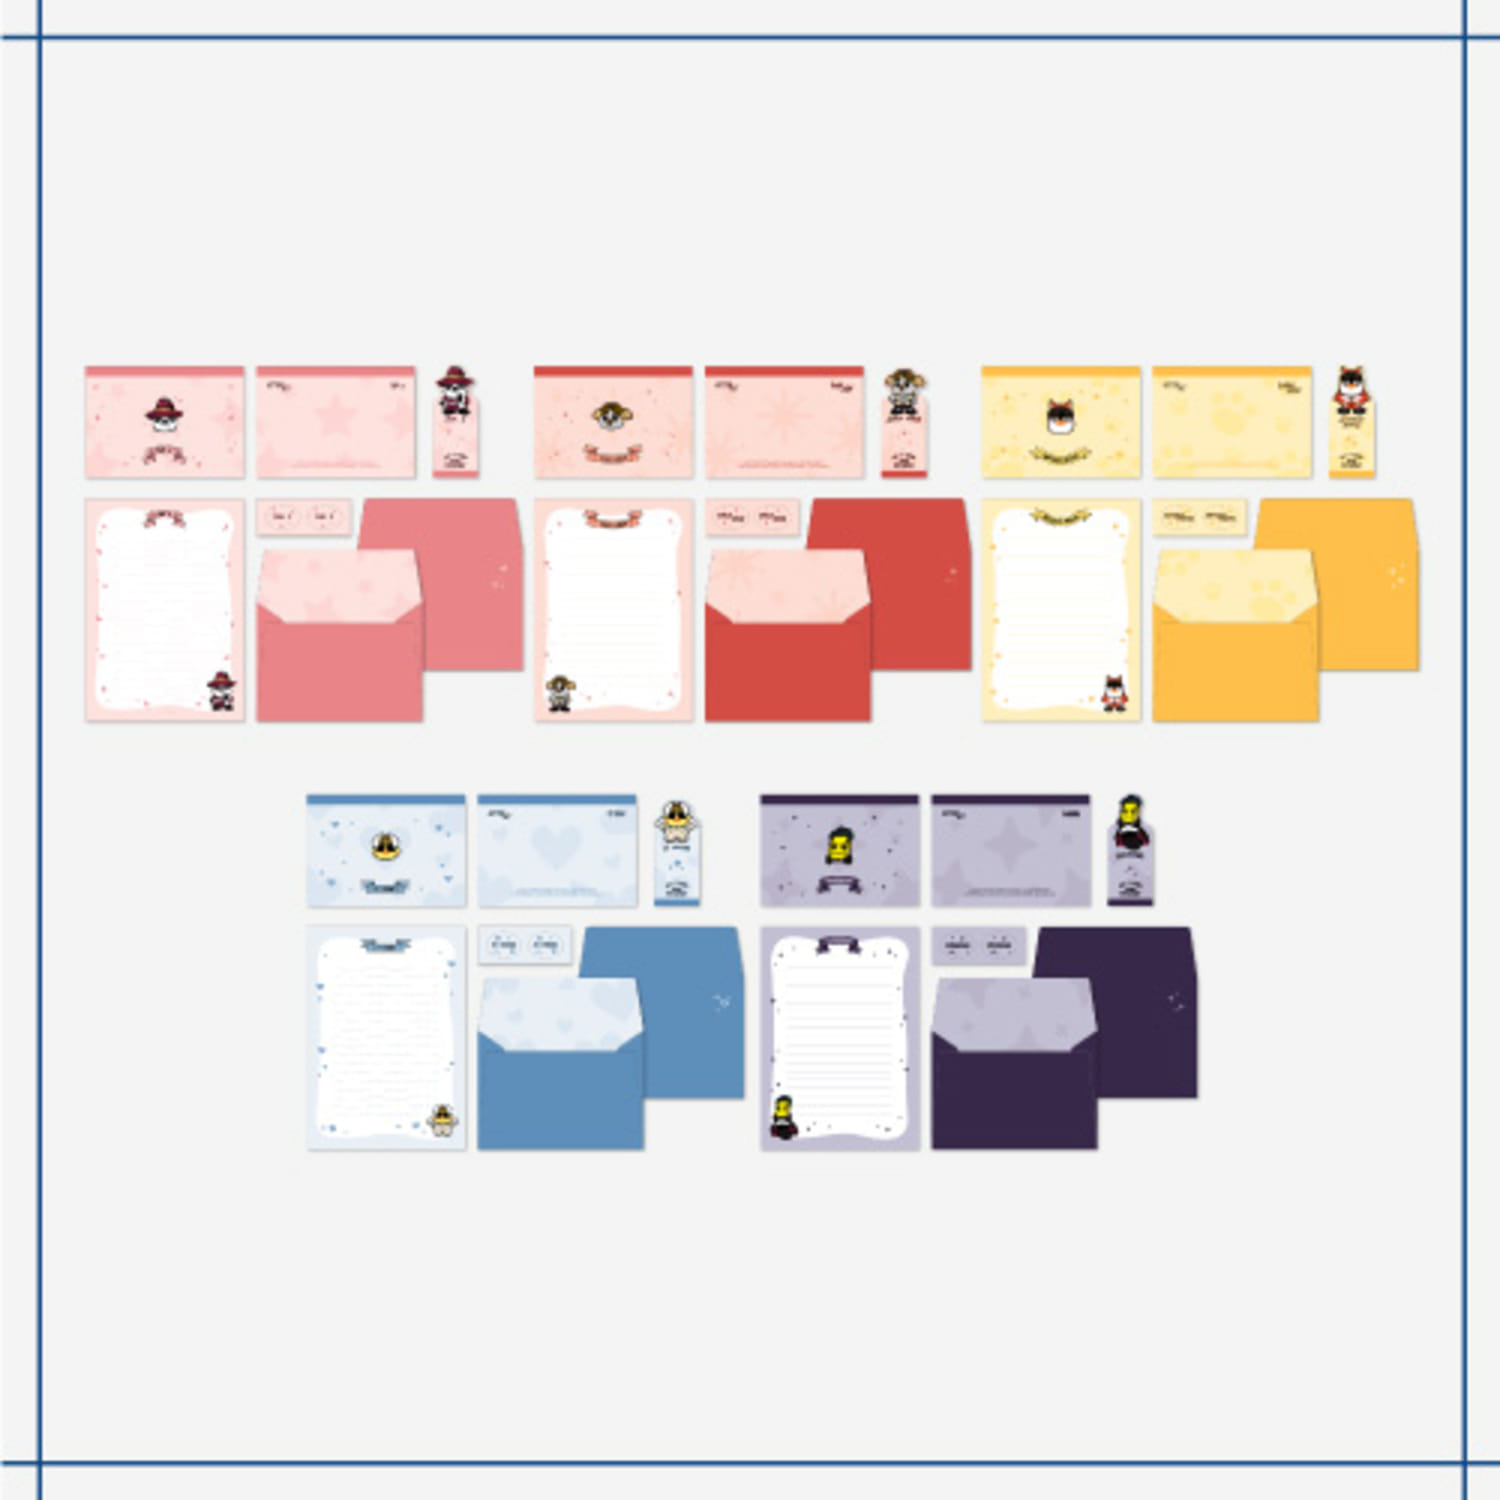 2PM [Dear. HOTTEST] OFFICIAL MD - 편지지 세트 LETTER SET